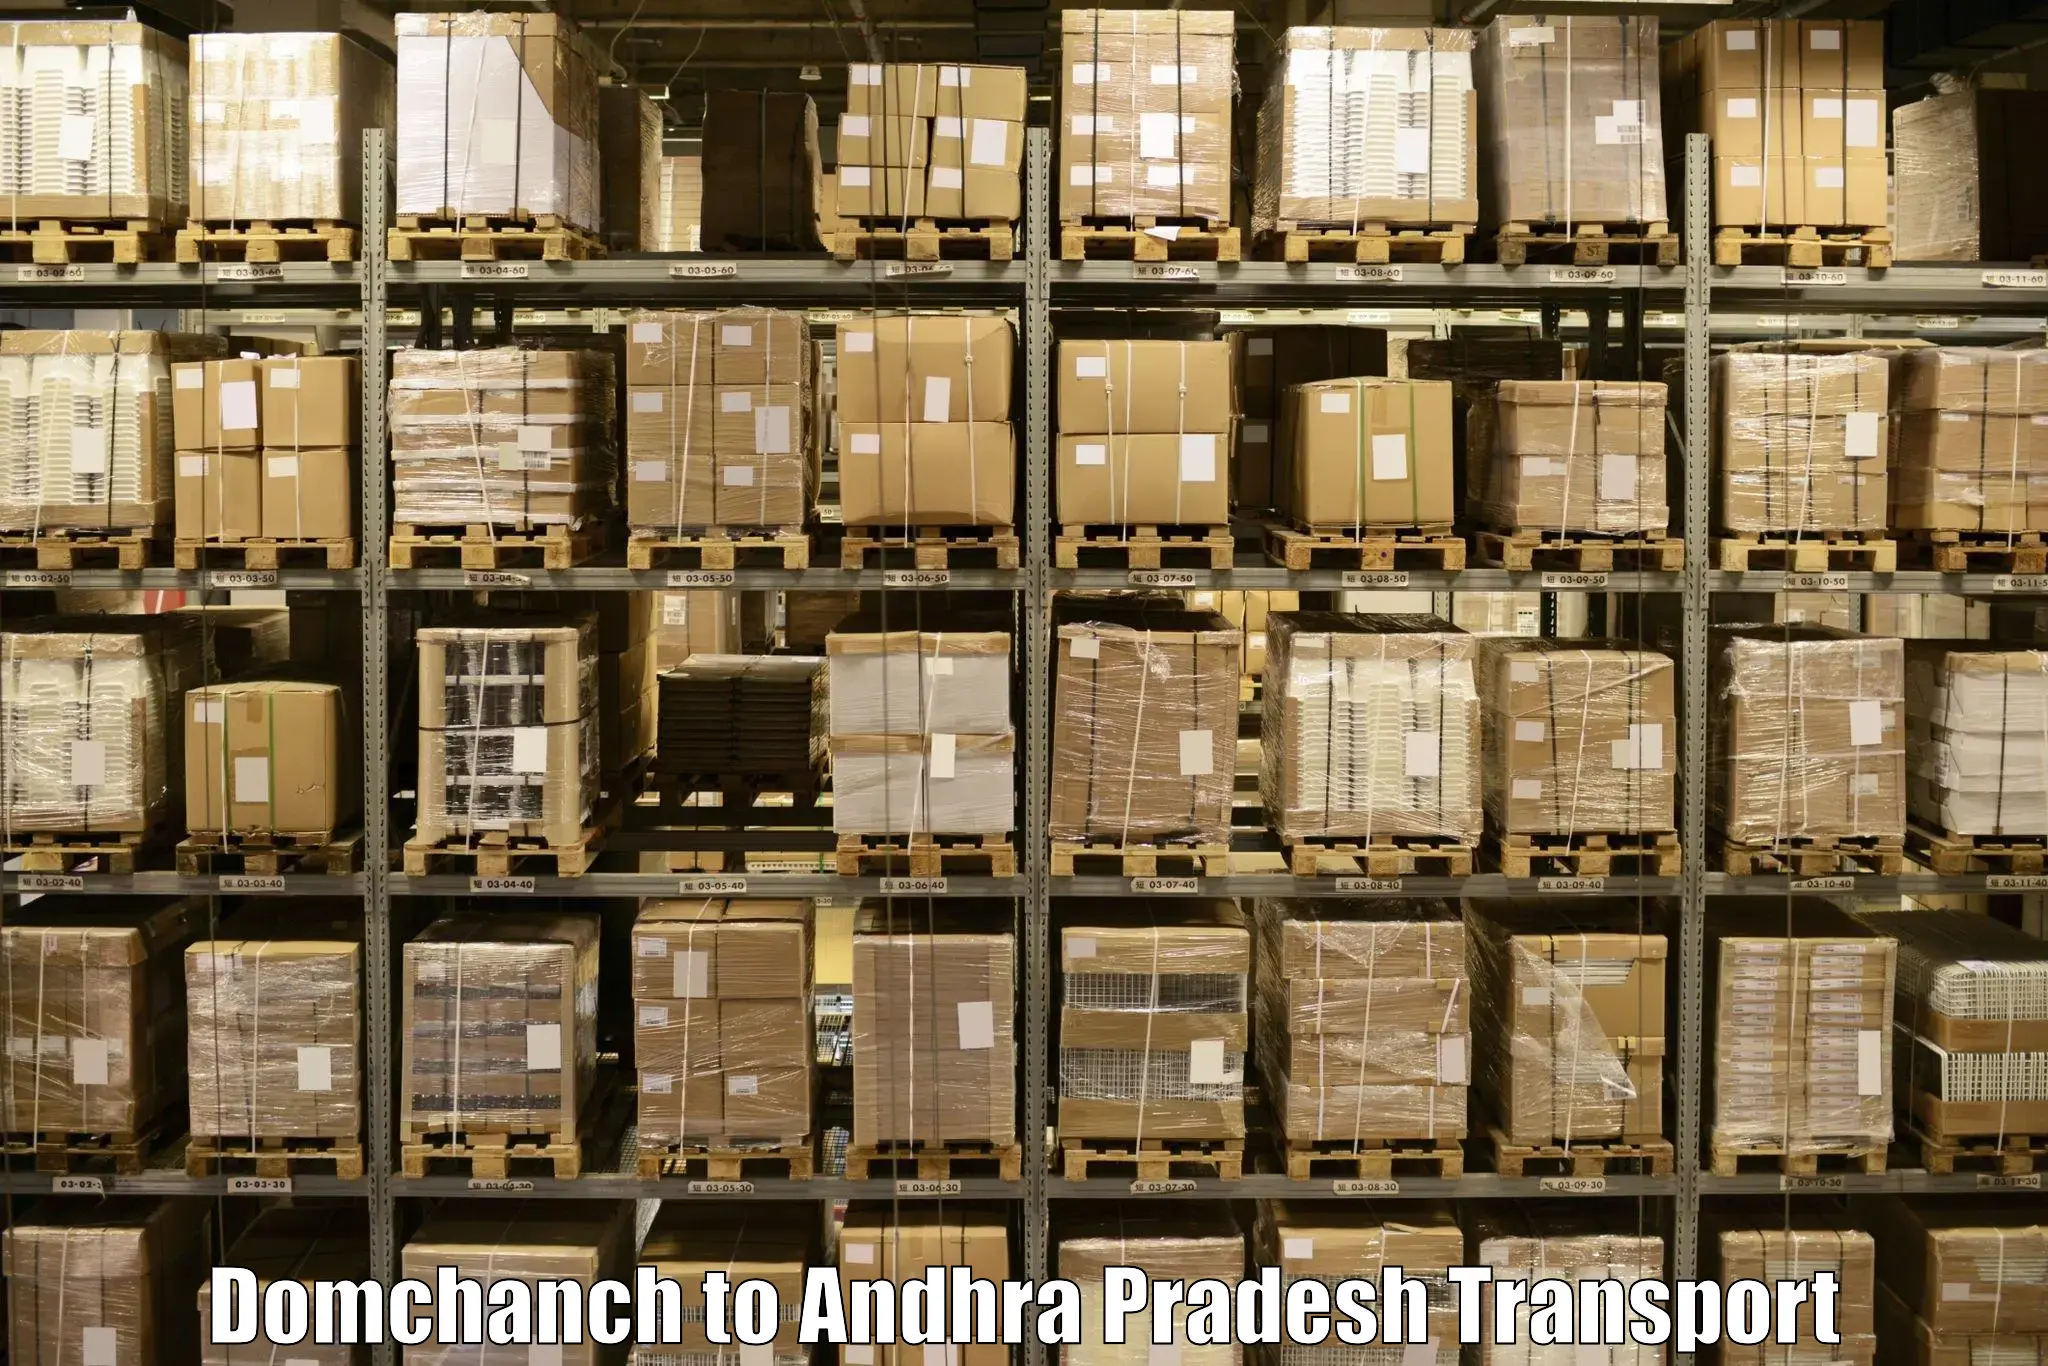 Daily transport service Domchanch to Pathapatnam